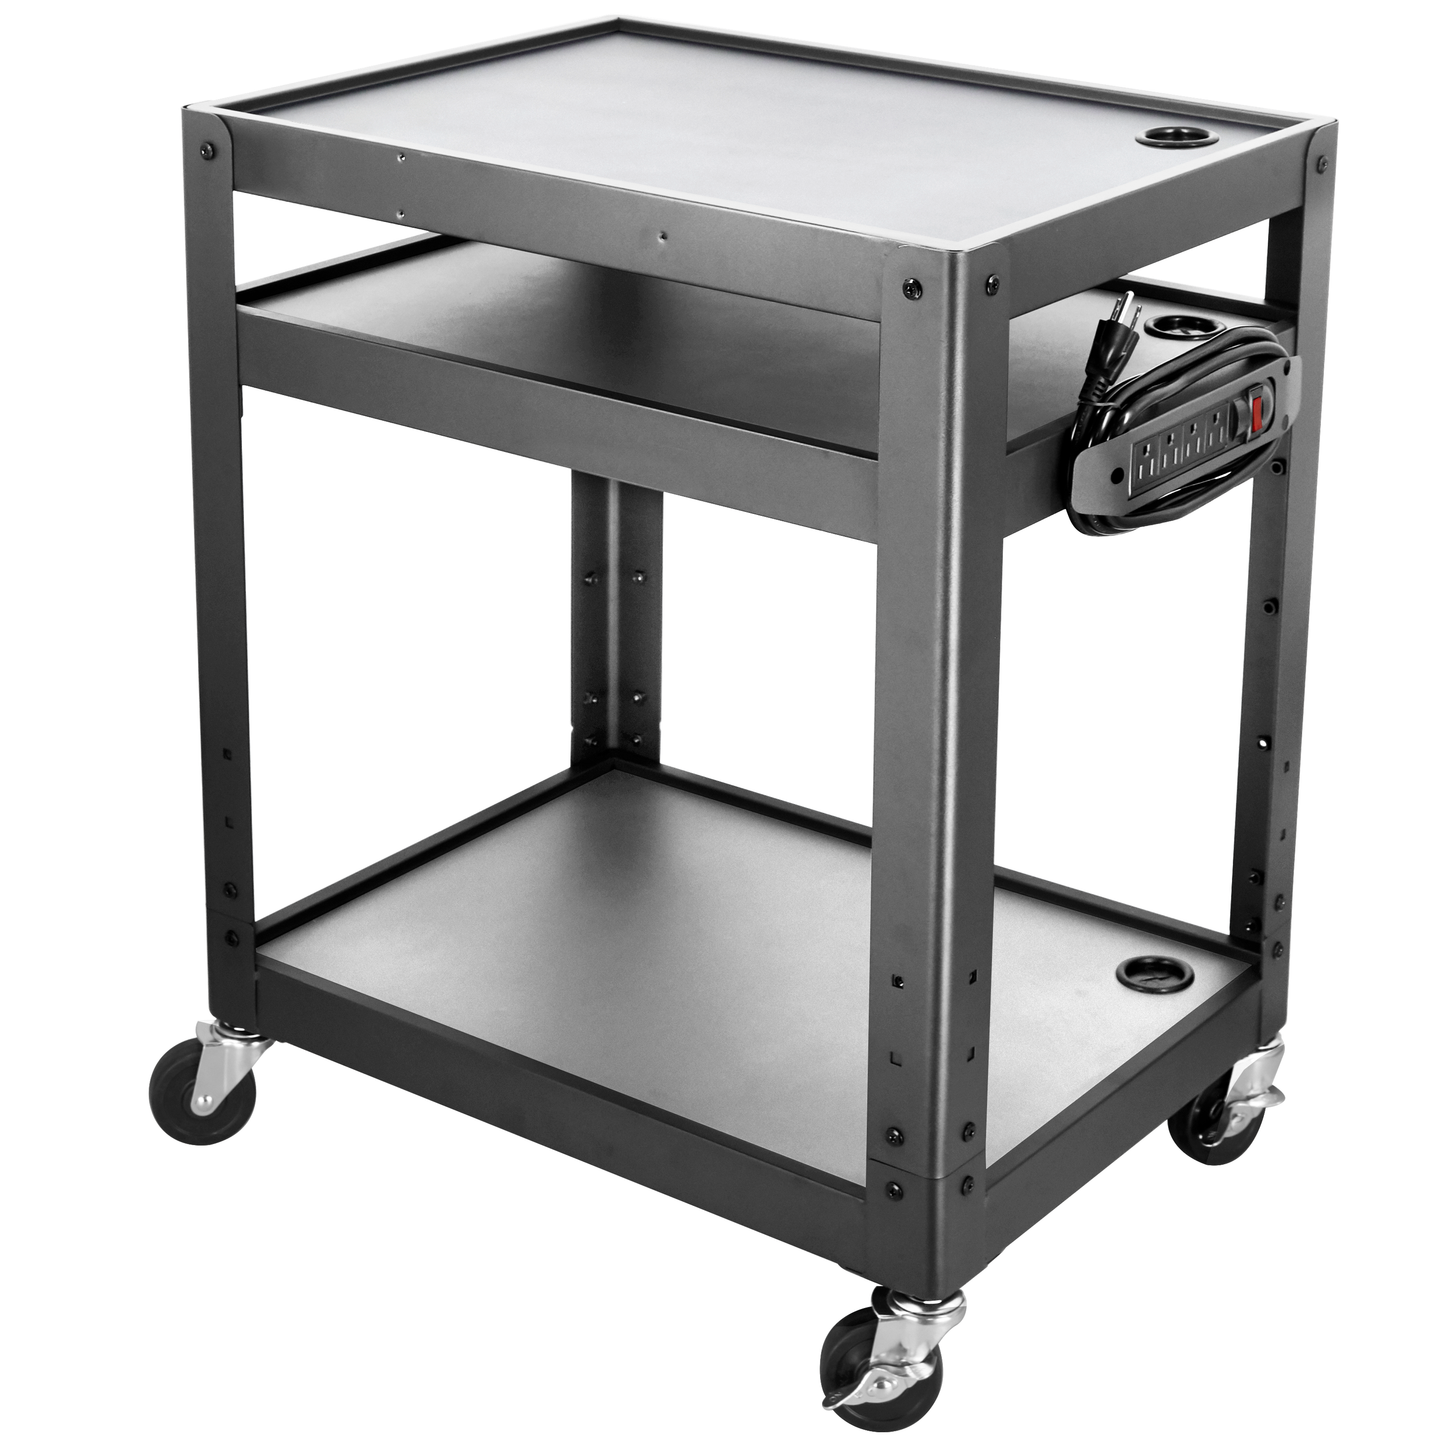 M-AV-JS - 3 Shelf Metal Utility cart - Steel Construction Mobile Presentation Cart Projection Cart with Power Strip - Durable Utility Cart AV Carts on Wheels - Supports Up to 300 LBs (24'' x 18'' x 41'')